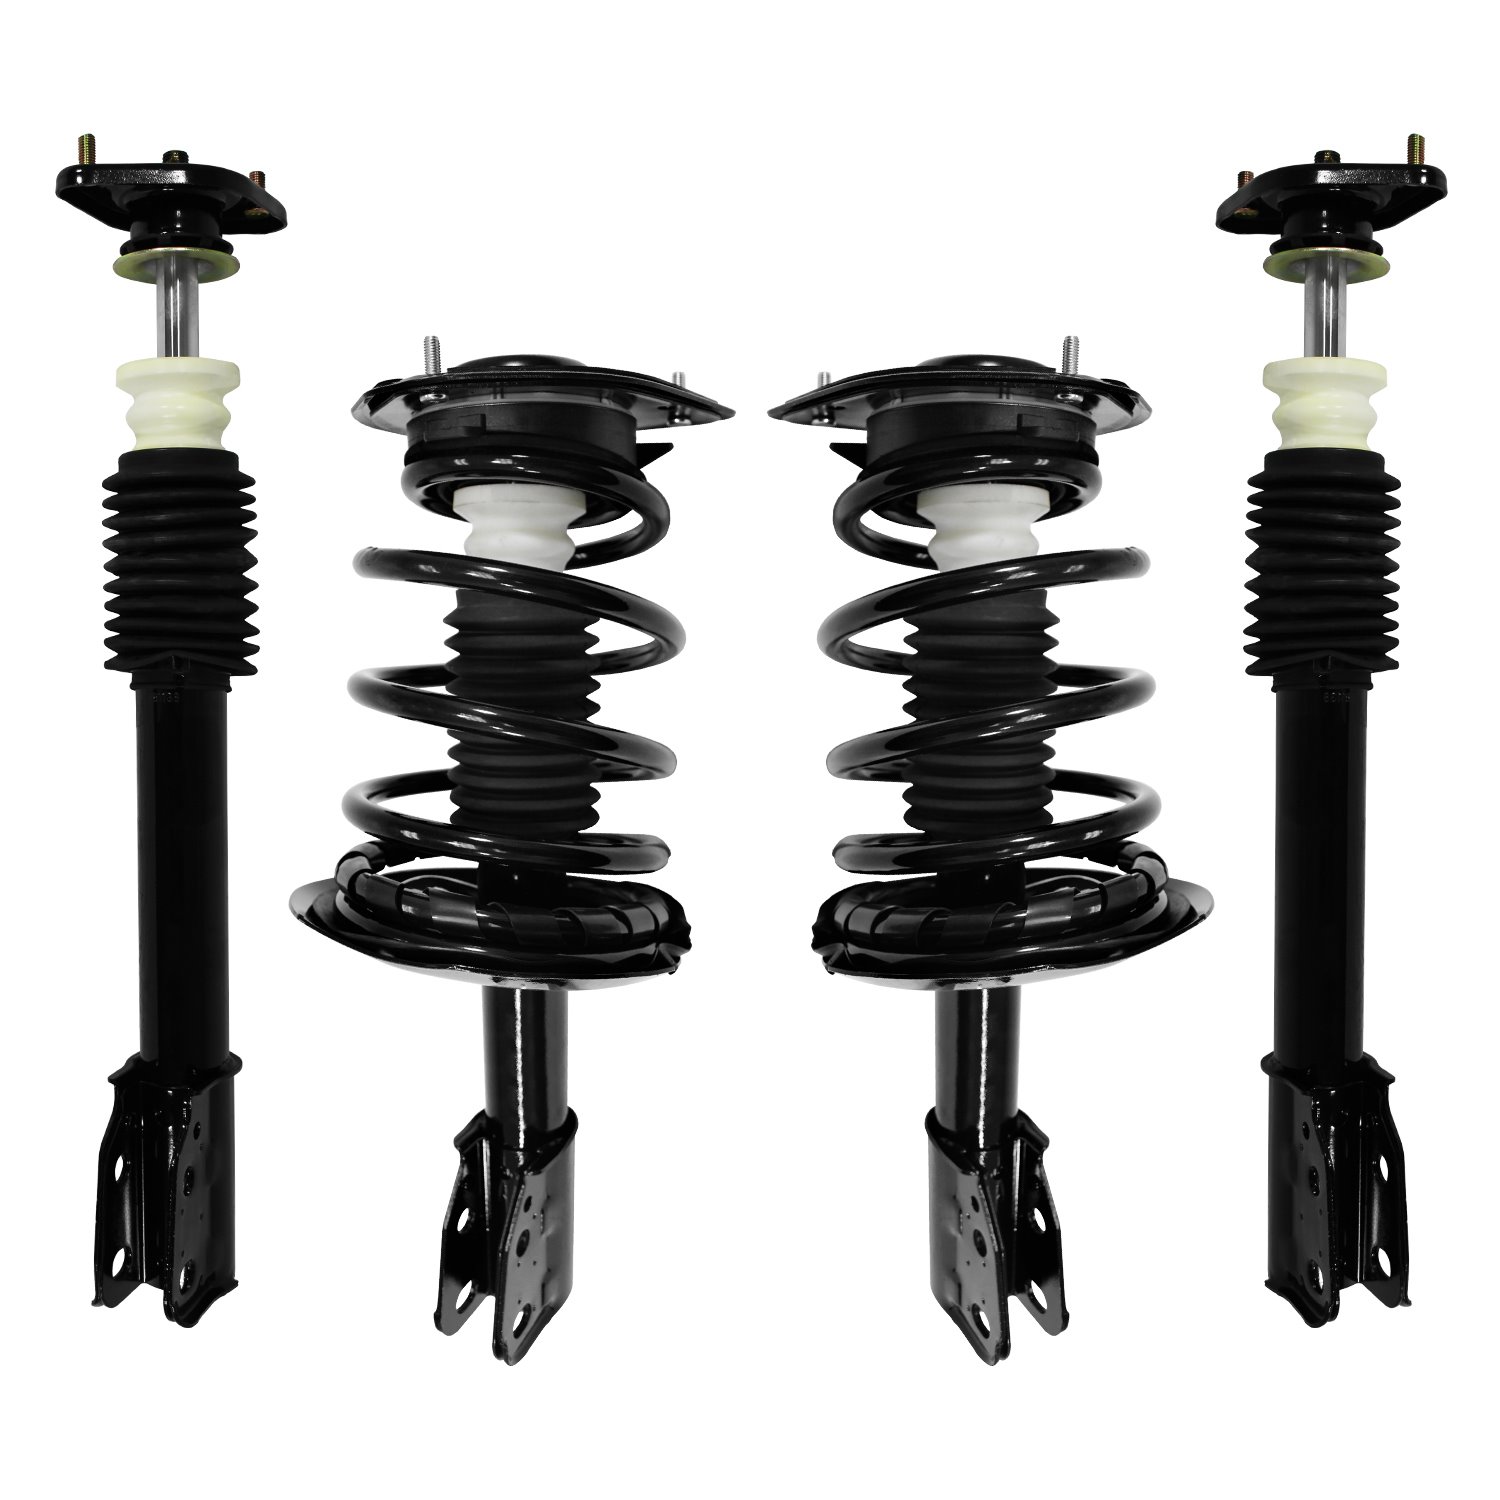 4-11040-15390-001 Front & Rear Suspension Strut & Coil Spring Assembly Kit Fits Select GM